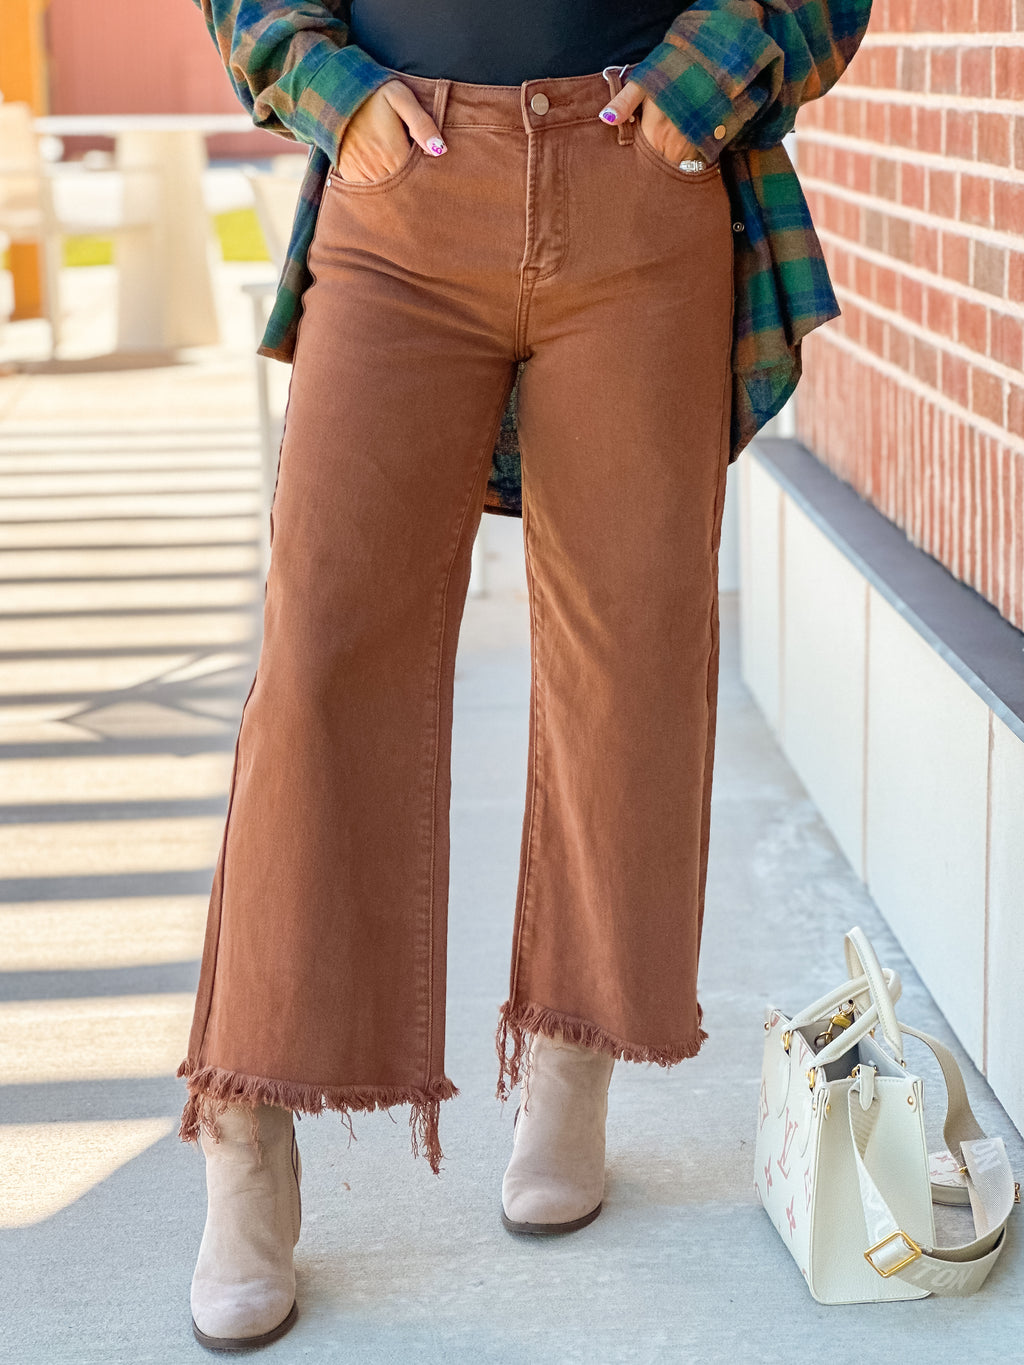 The Erin Cropped Risen Jeans - Expresso